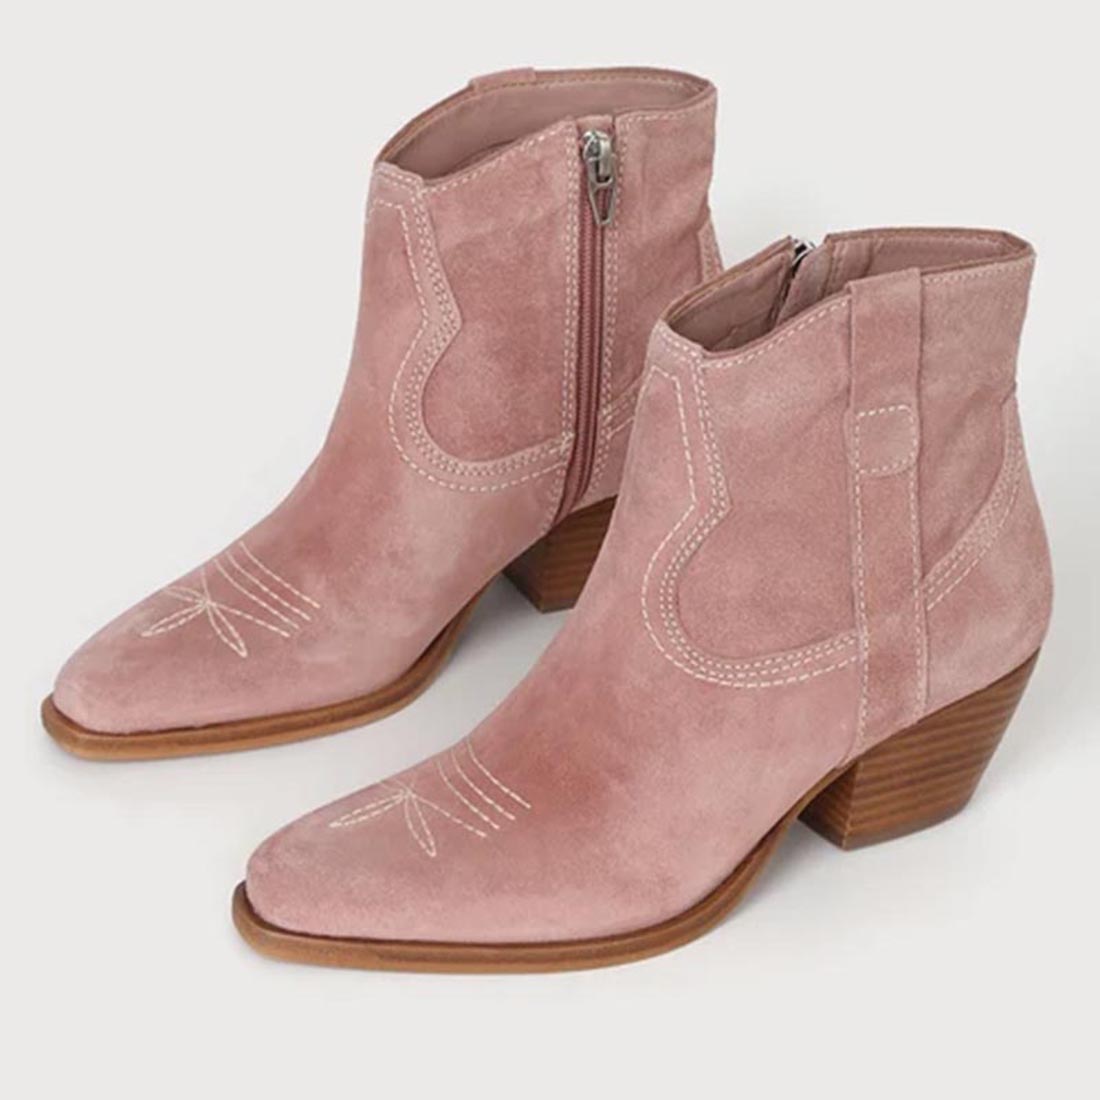 dolce vita silma rose suede booties 100337